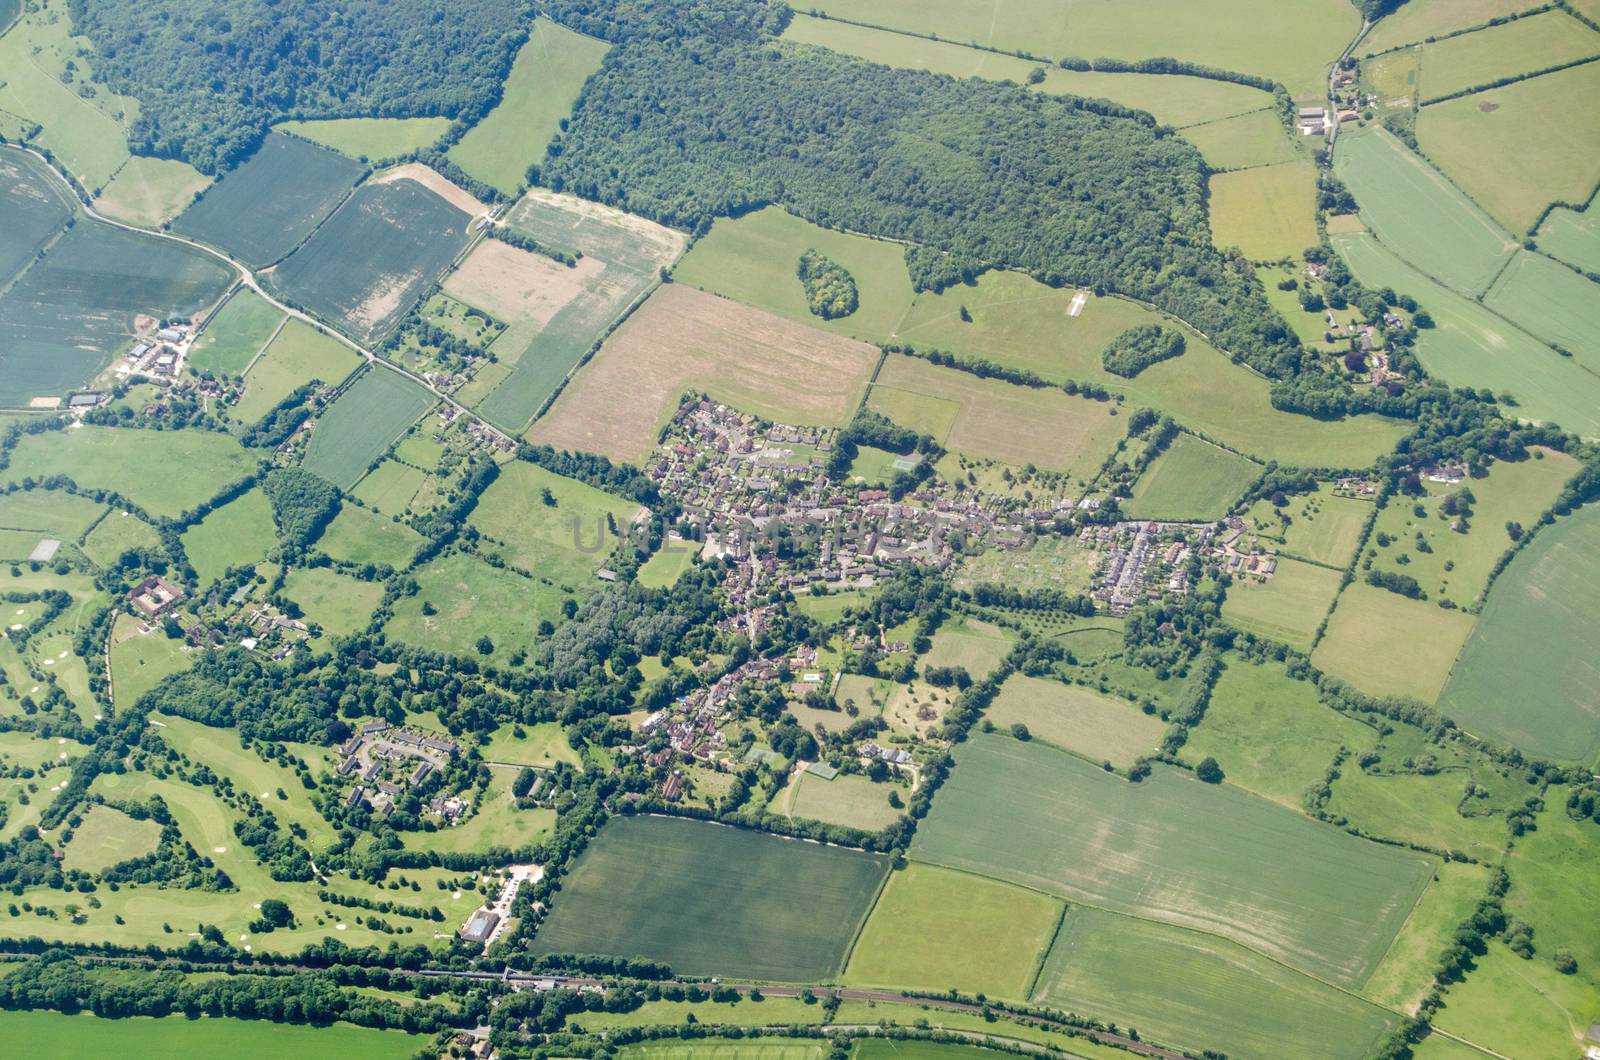 Aerial view of the Kent village of Shoreham on a sunny summer day.  Note the white cross cut into the chalk downs which is a memorial to those killed in World War I.  